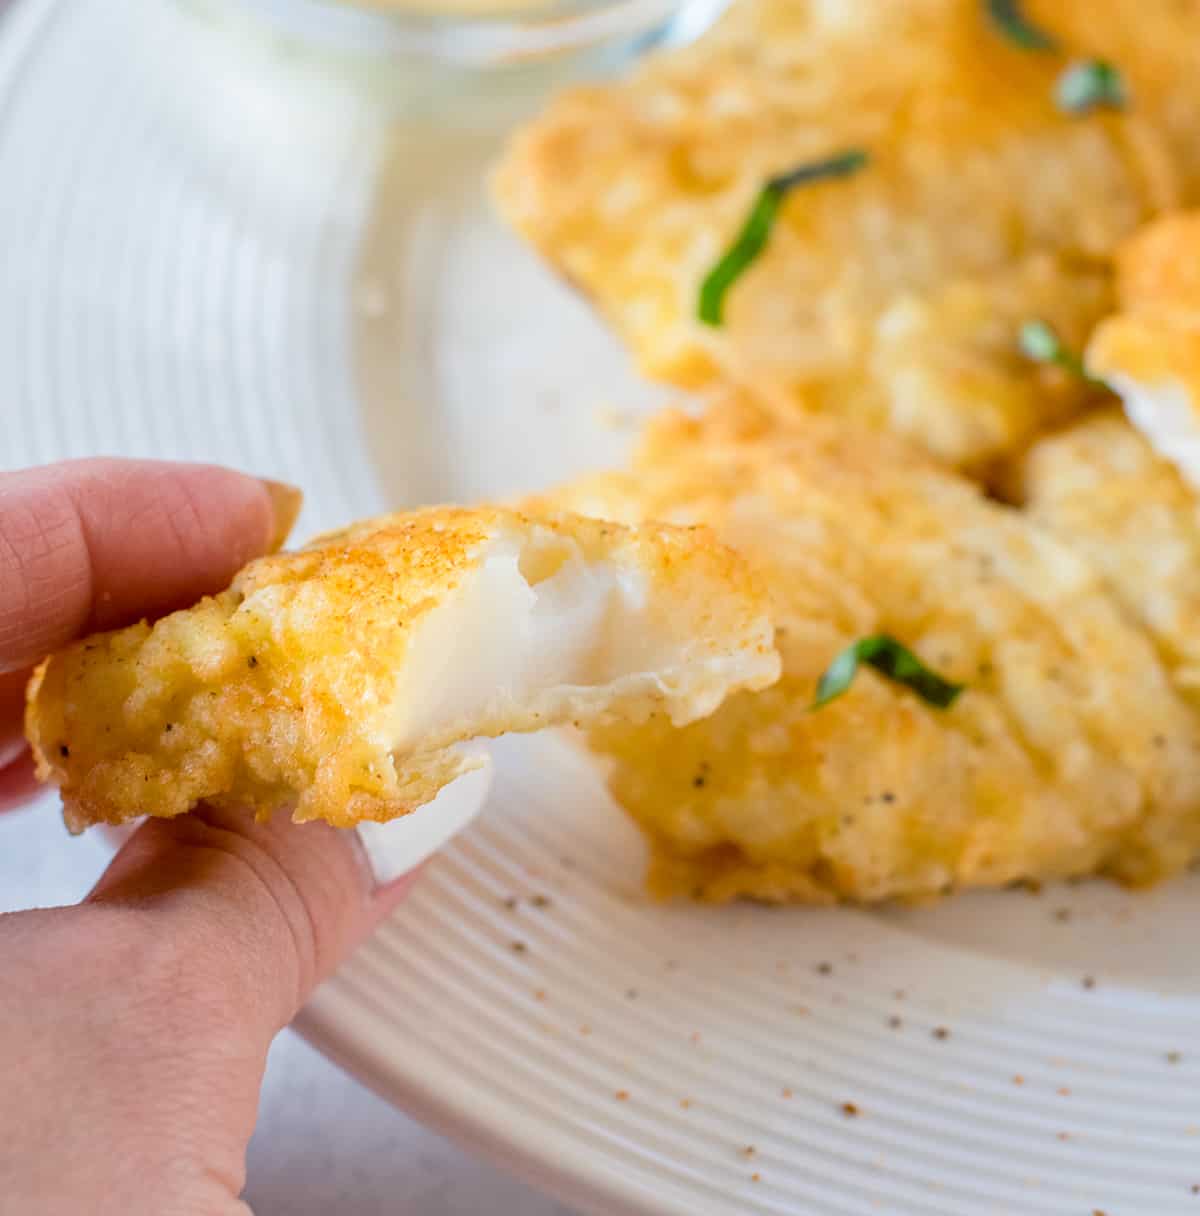 holding a piece of deep-fried cod